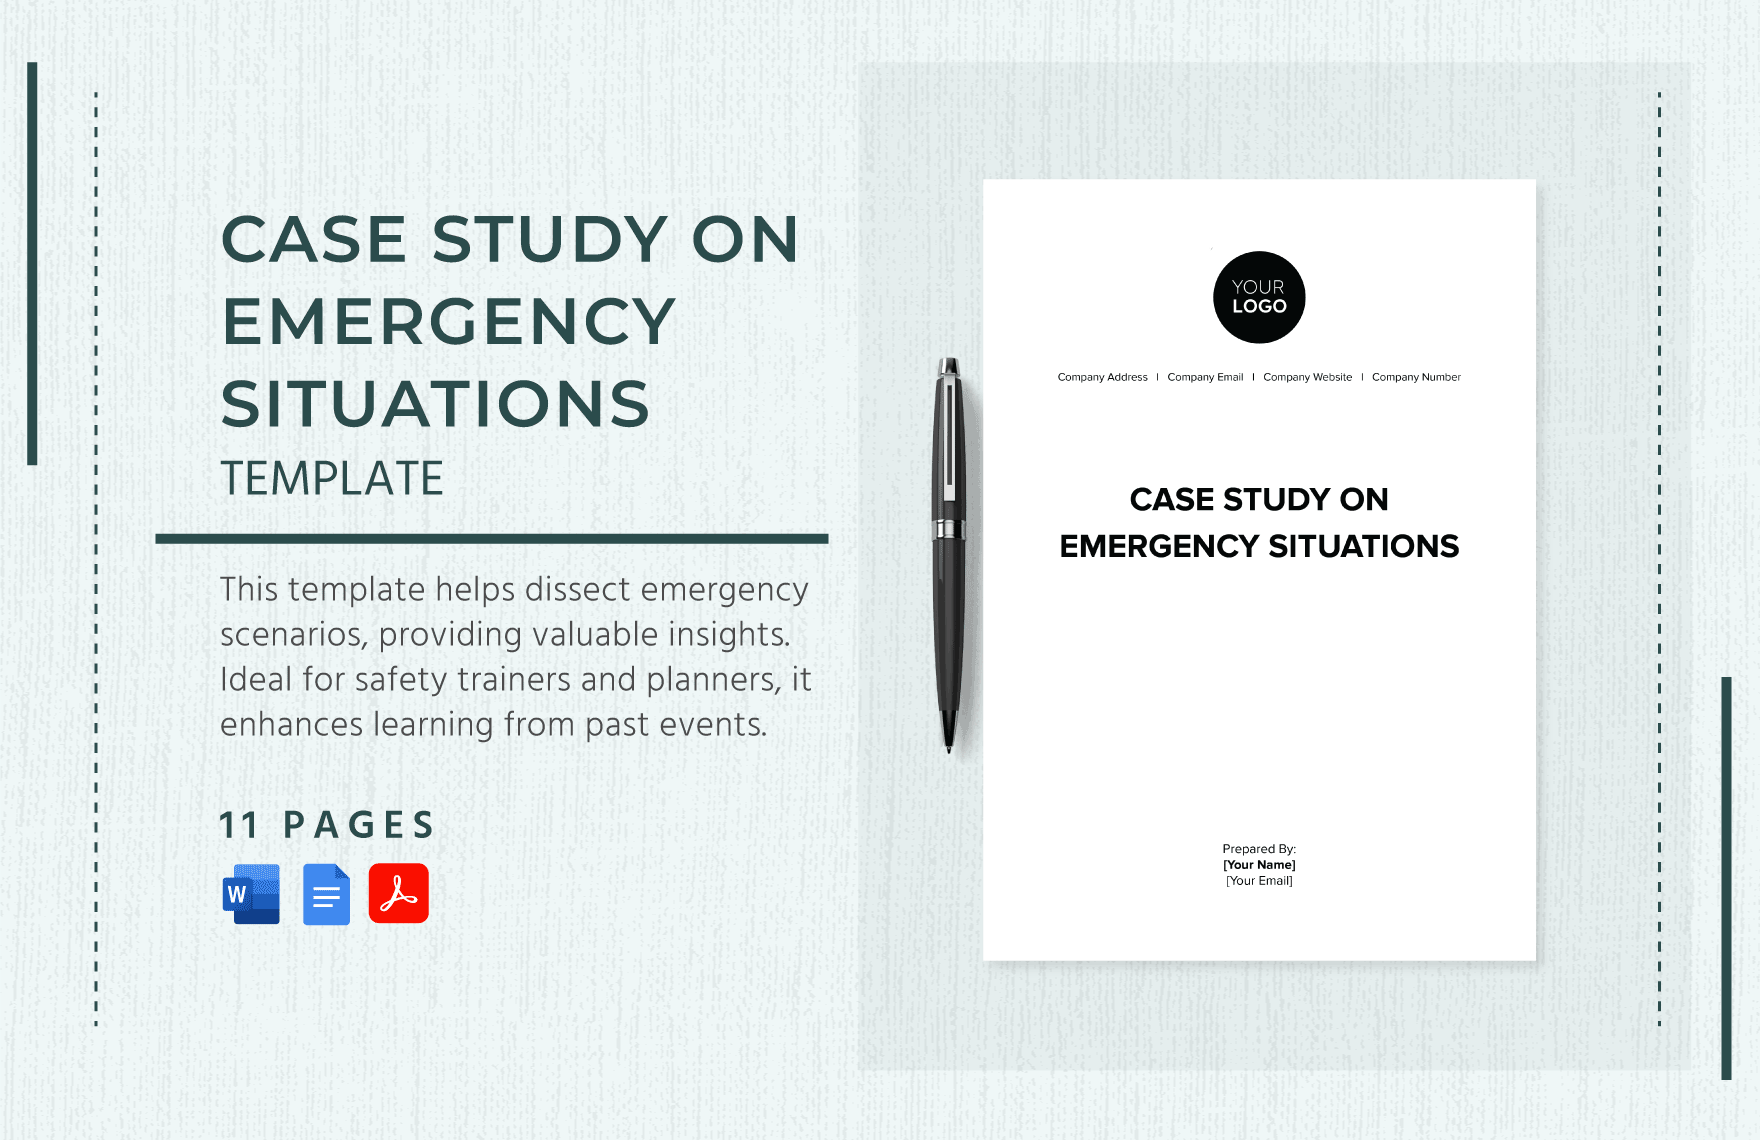 Case Study on Emergency Situations Template